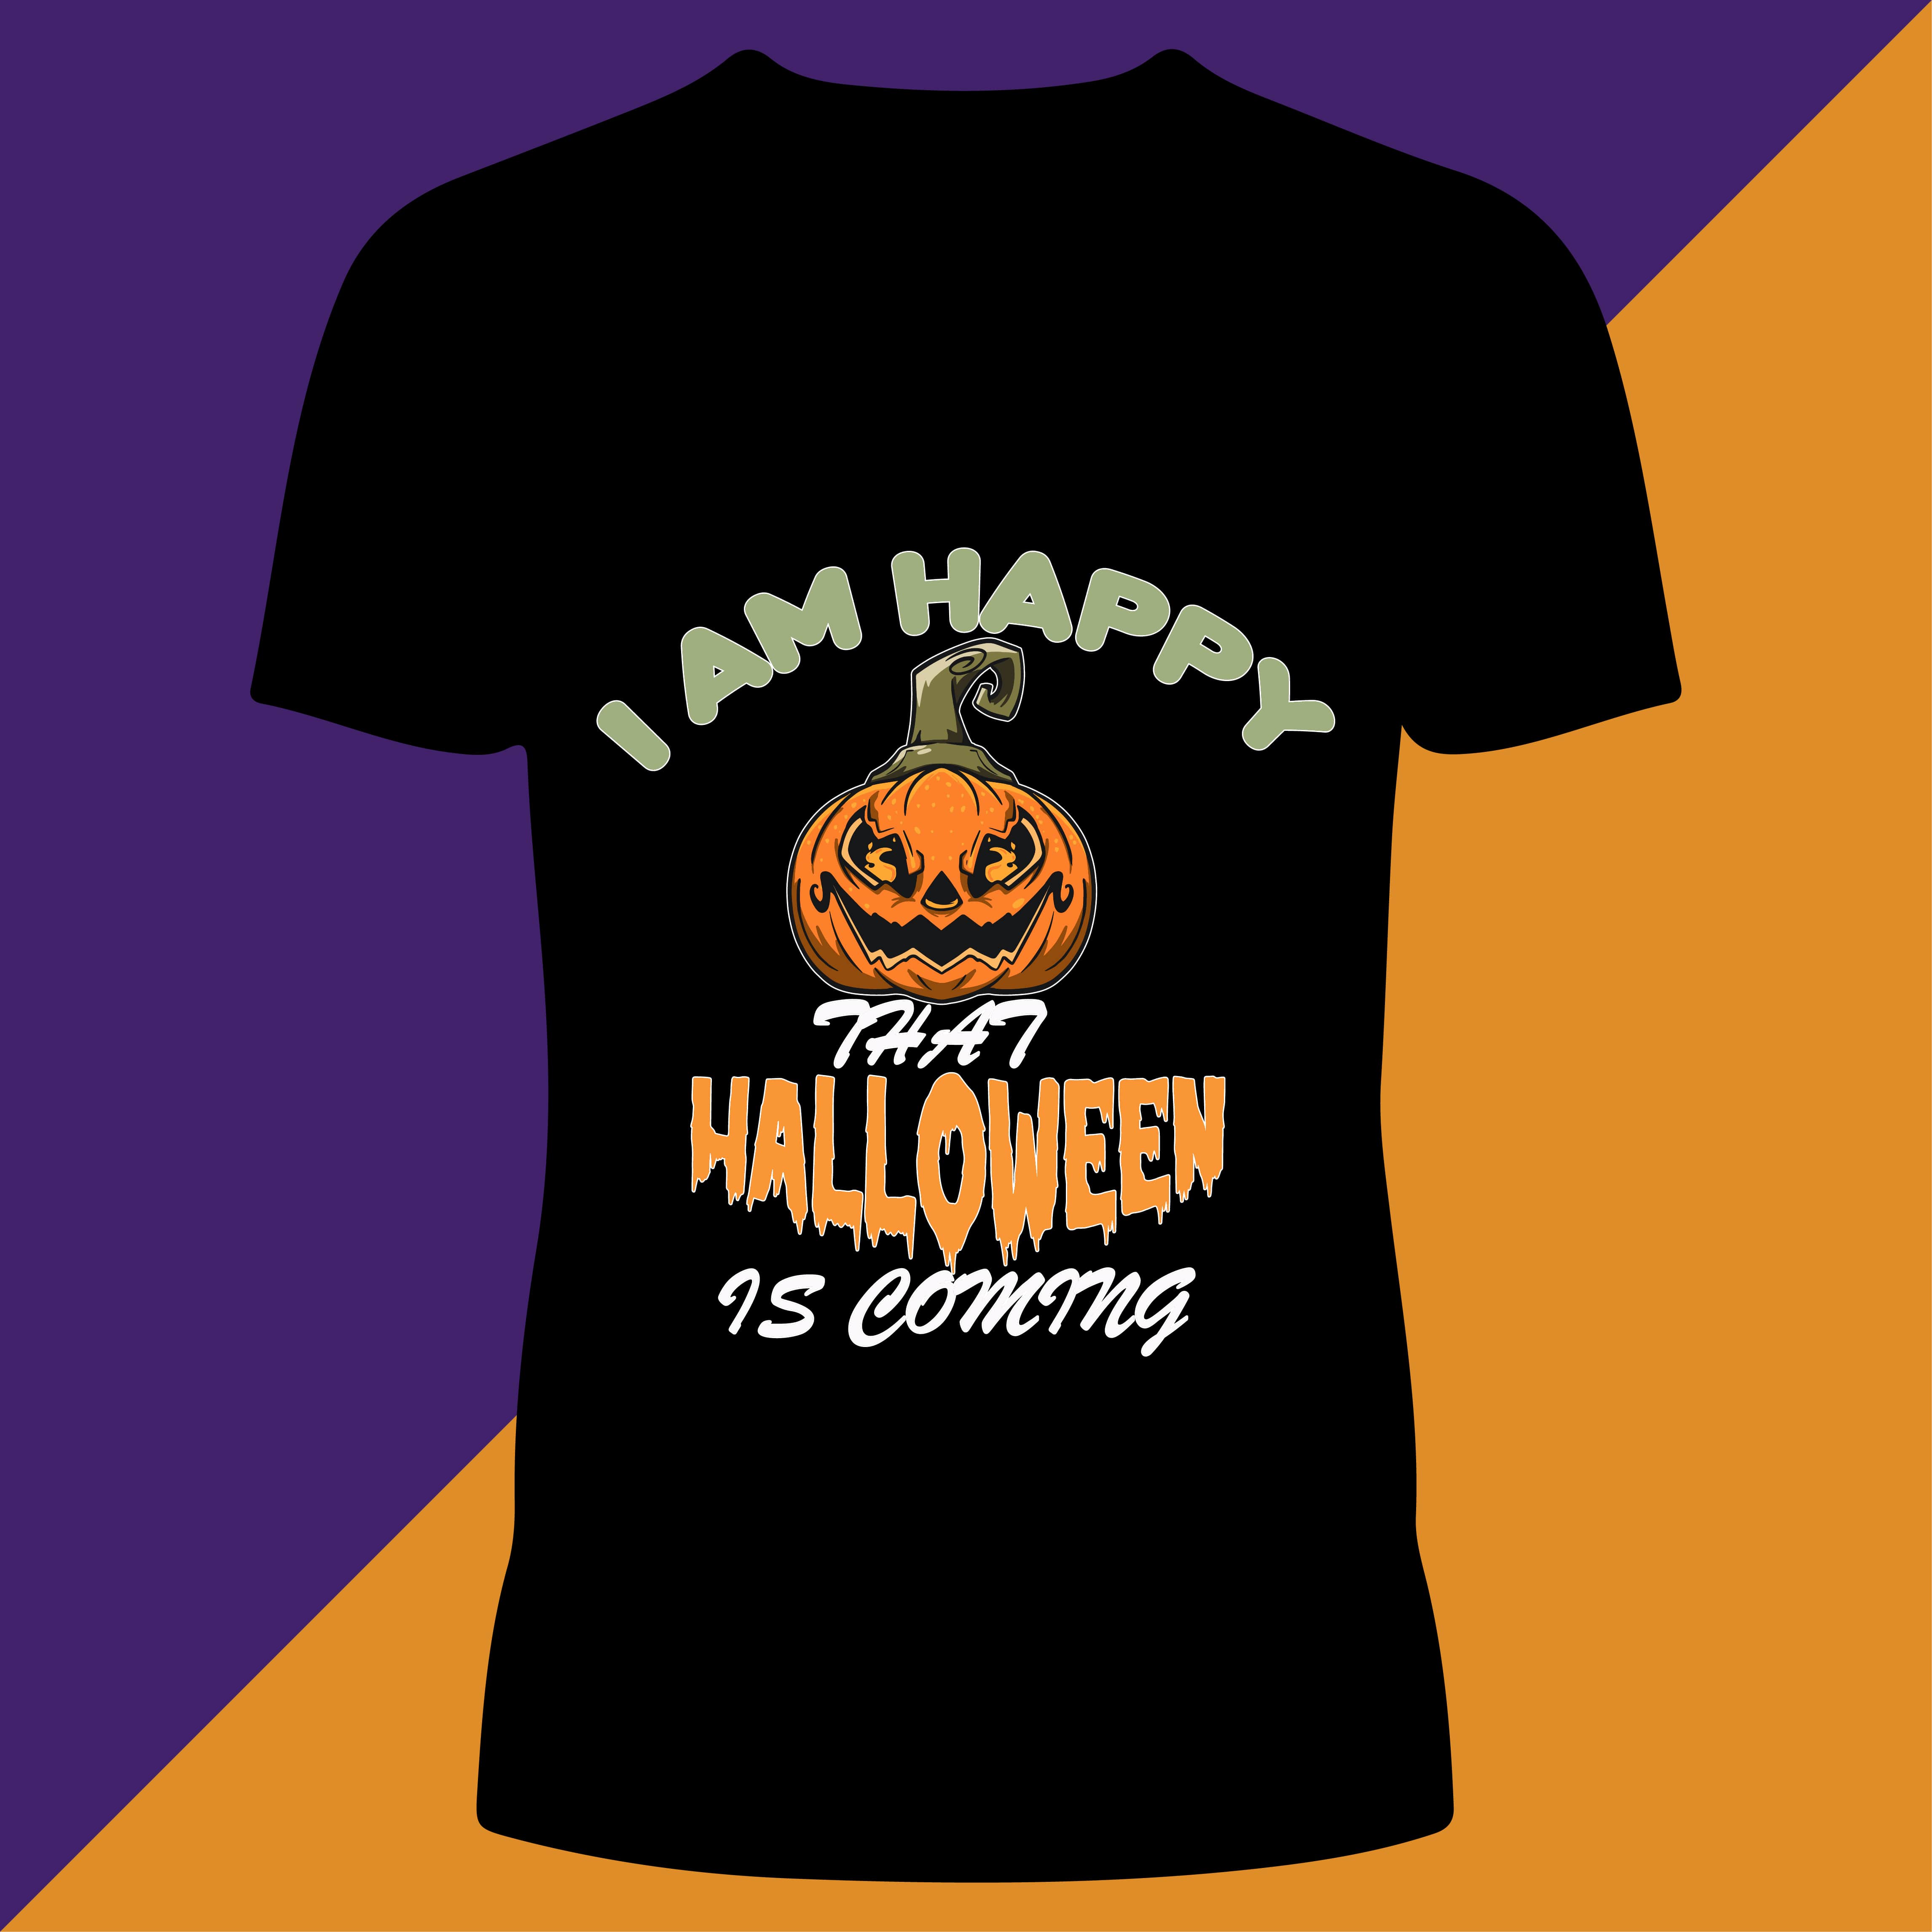 I Am Happy That Halloween Is Coming preview image.